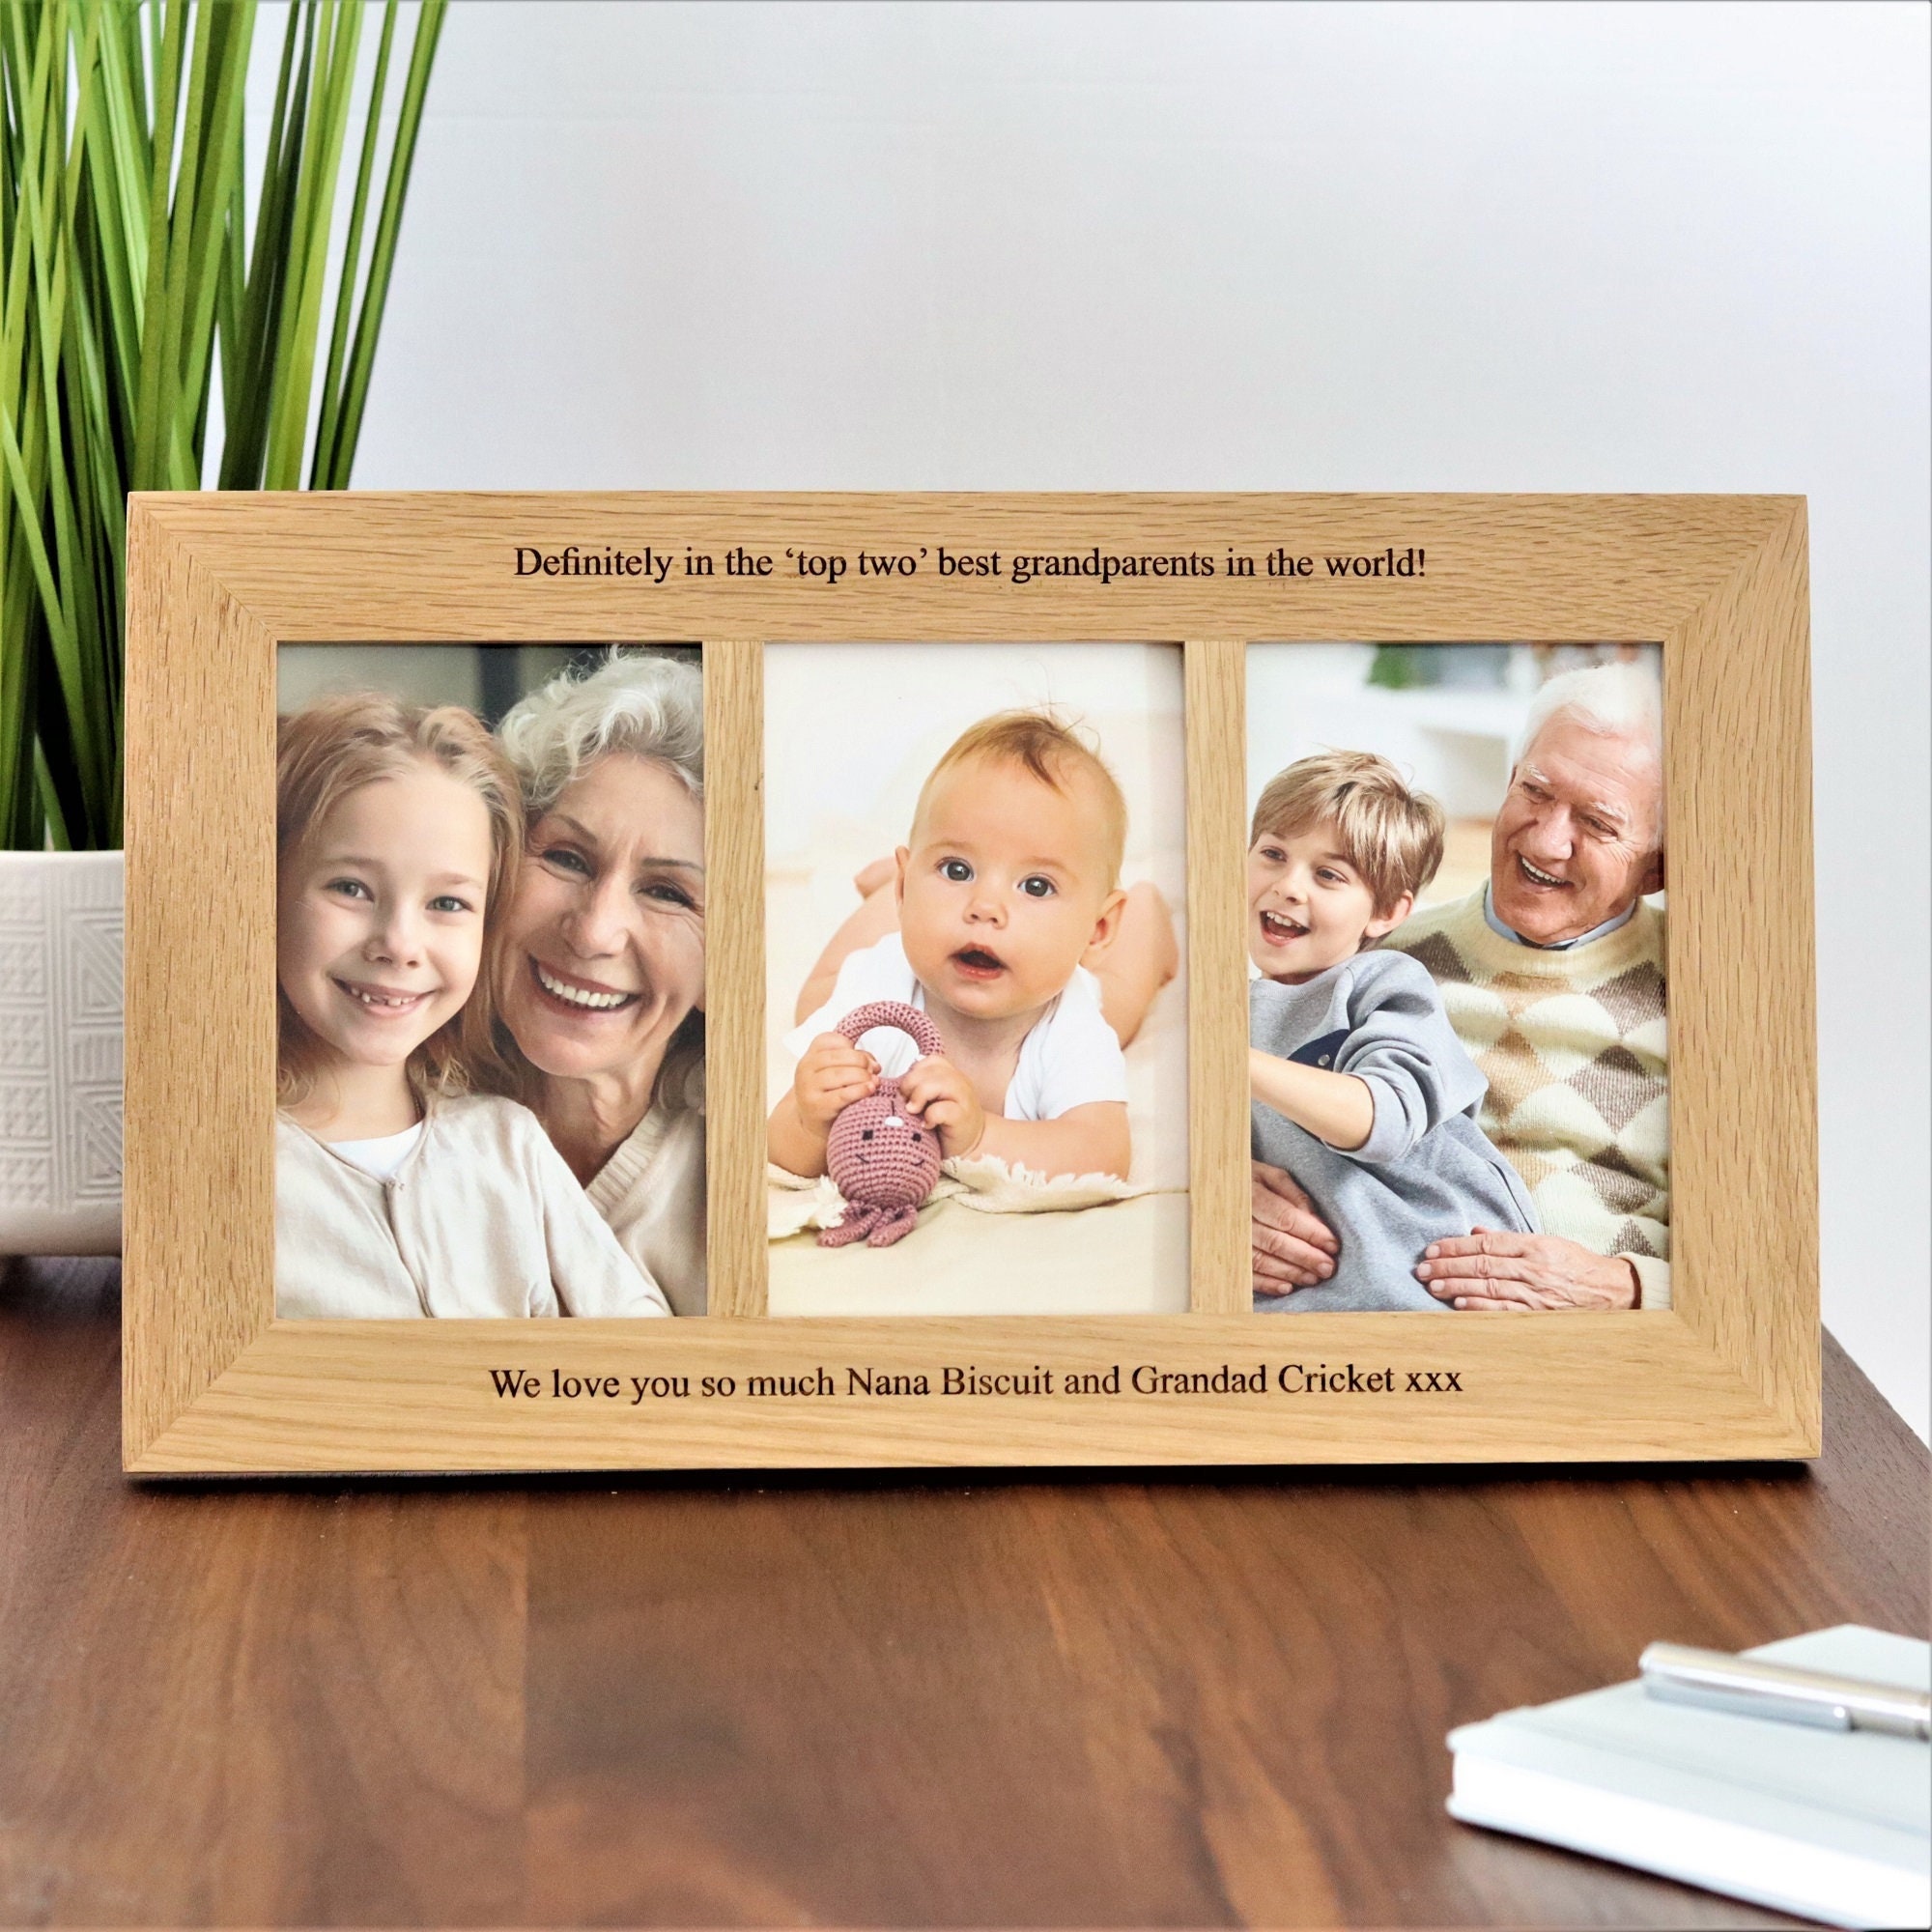 Collage / Grouping Photo Mat Fits 16x20 Frame Multi Opening Custom Color  M107 